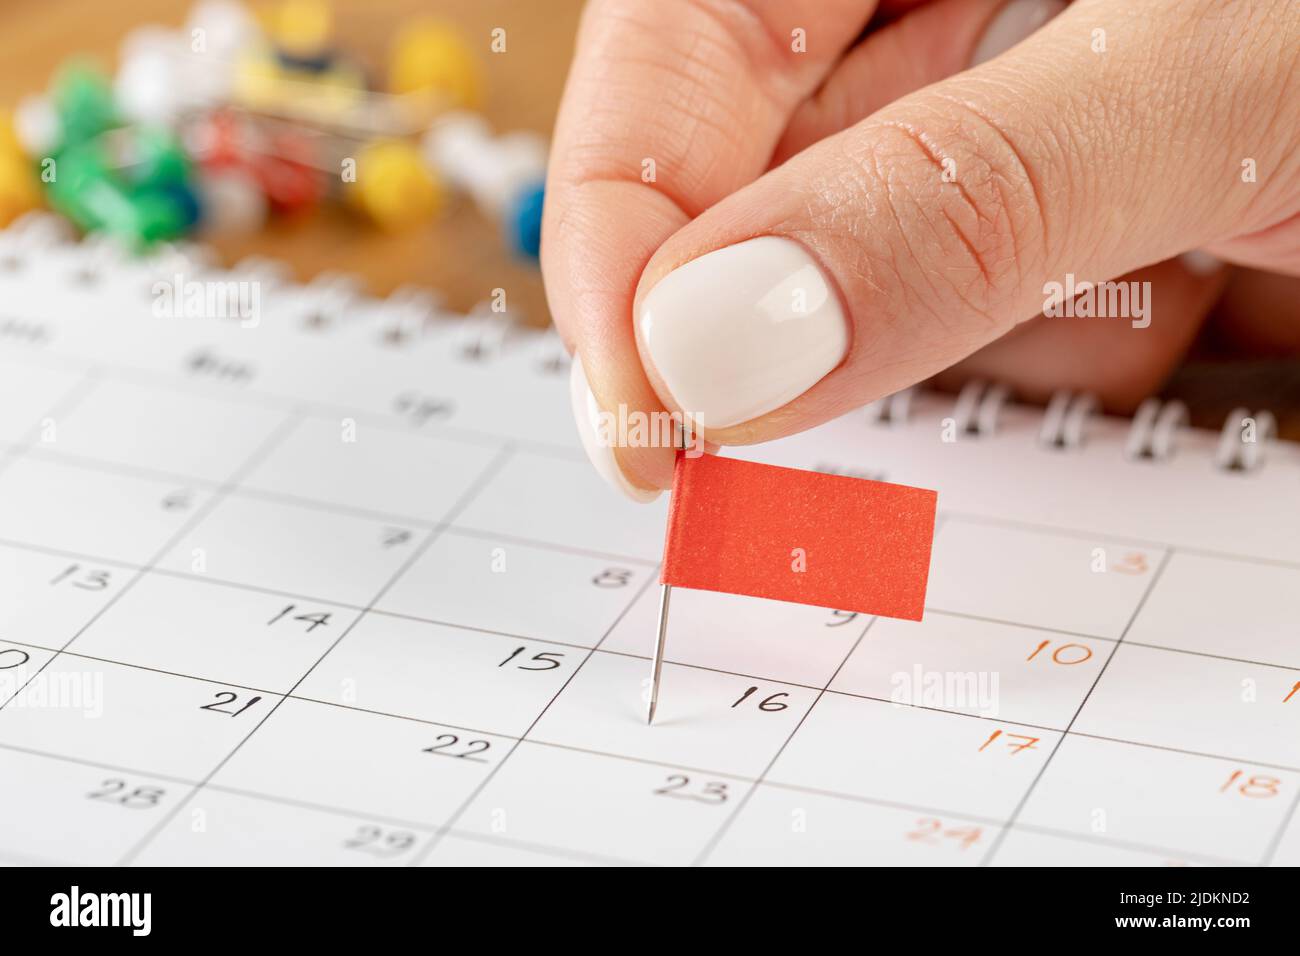 Hands fixing notes schedule, red flag pin thumbnail in calendar for meeting and appointment reminder Stock Photo